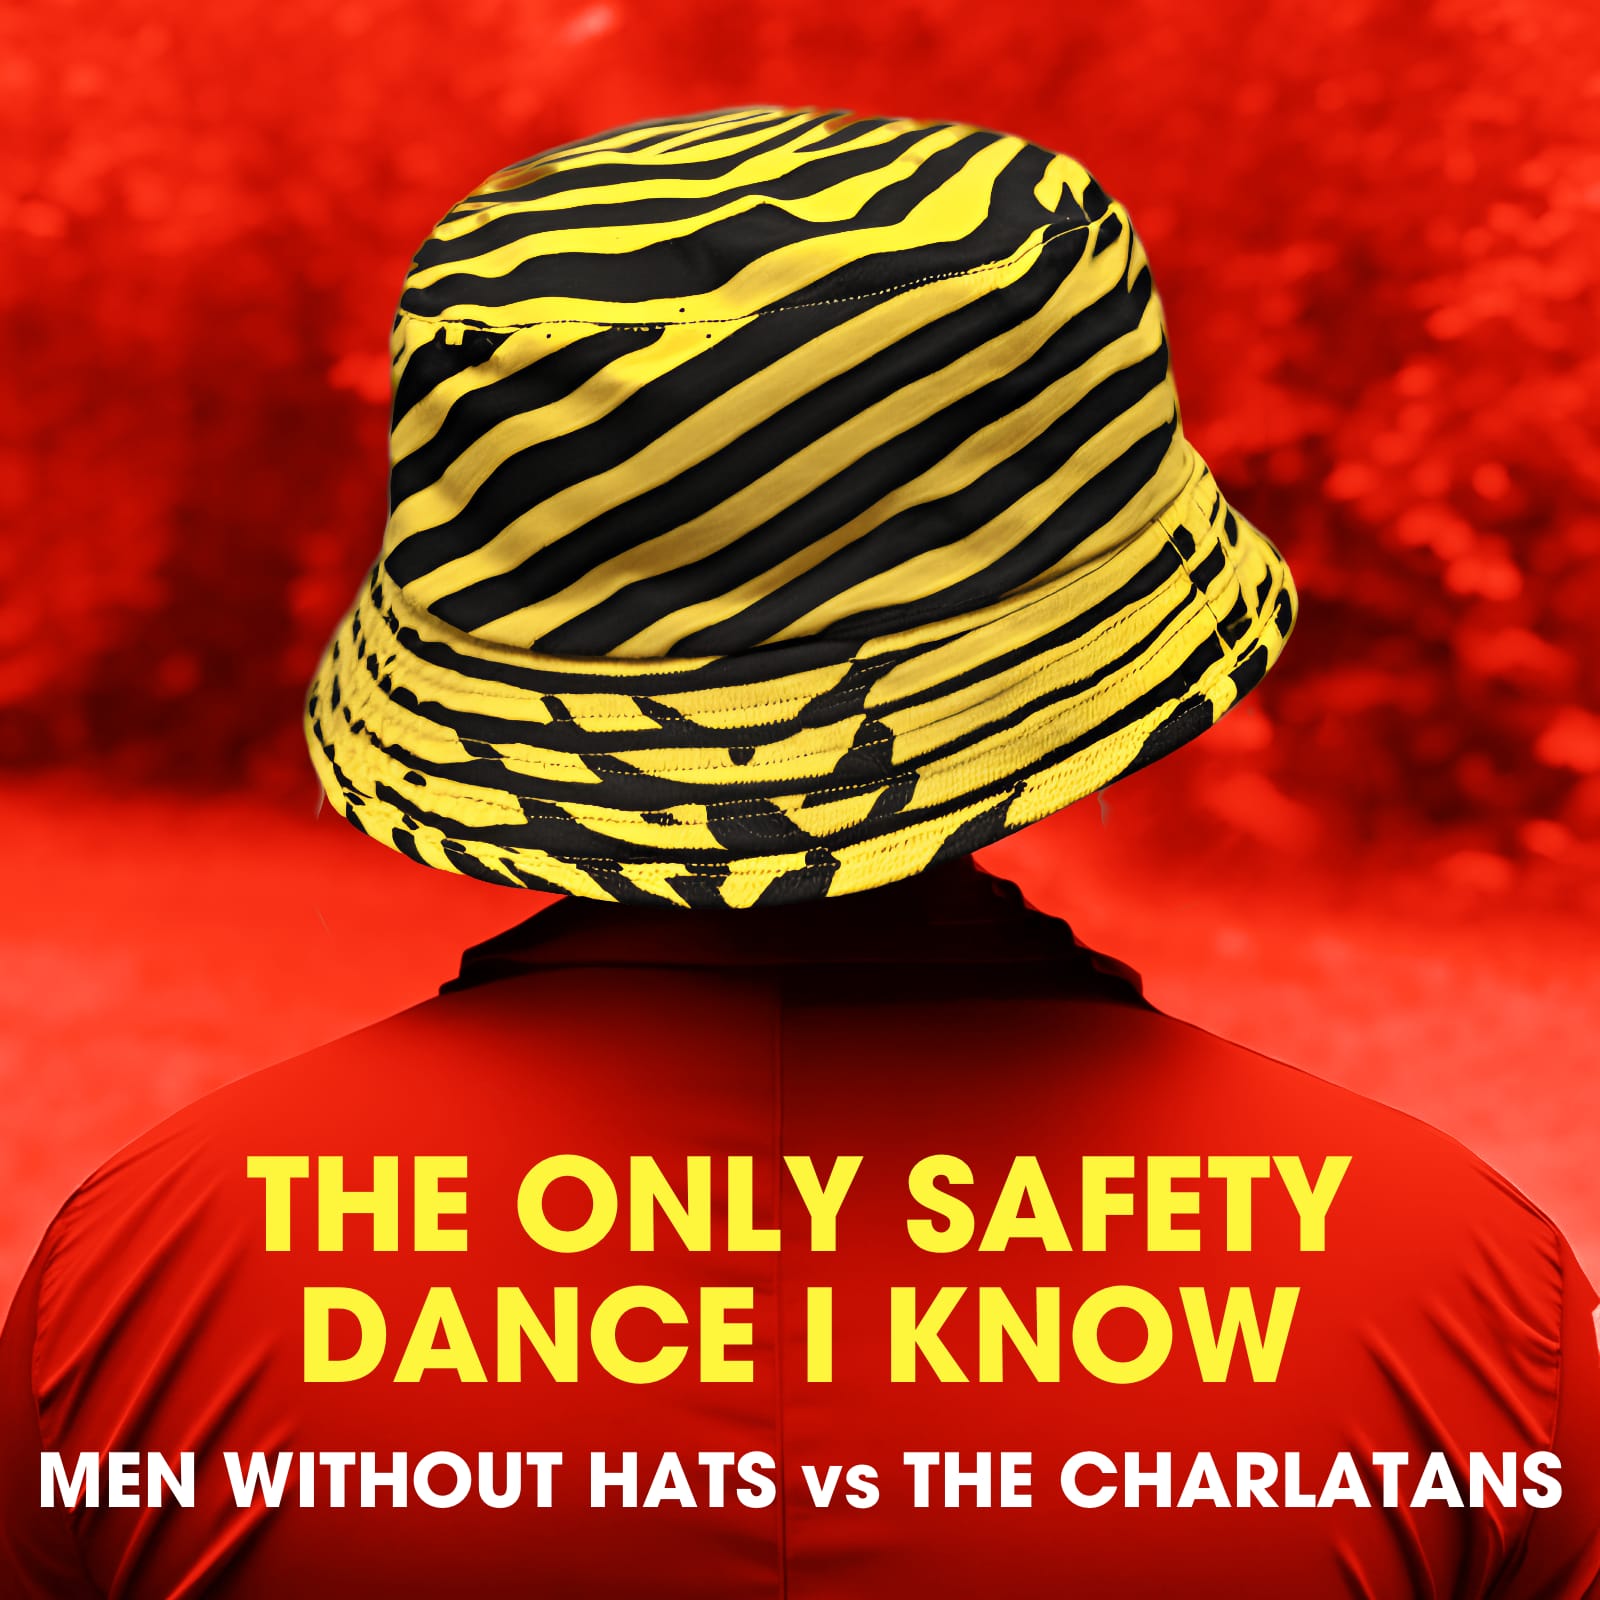 The Only Safety Dance I Know (Men Without Hats vs Charlatans)